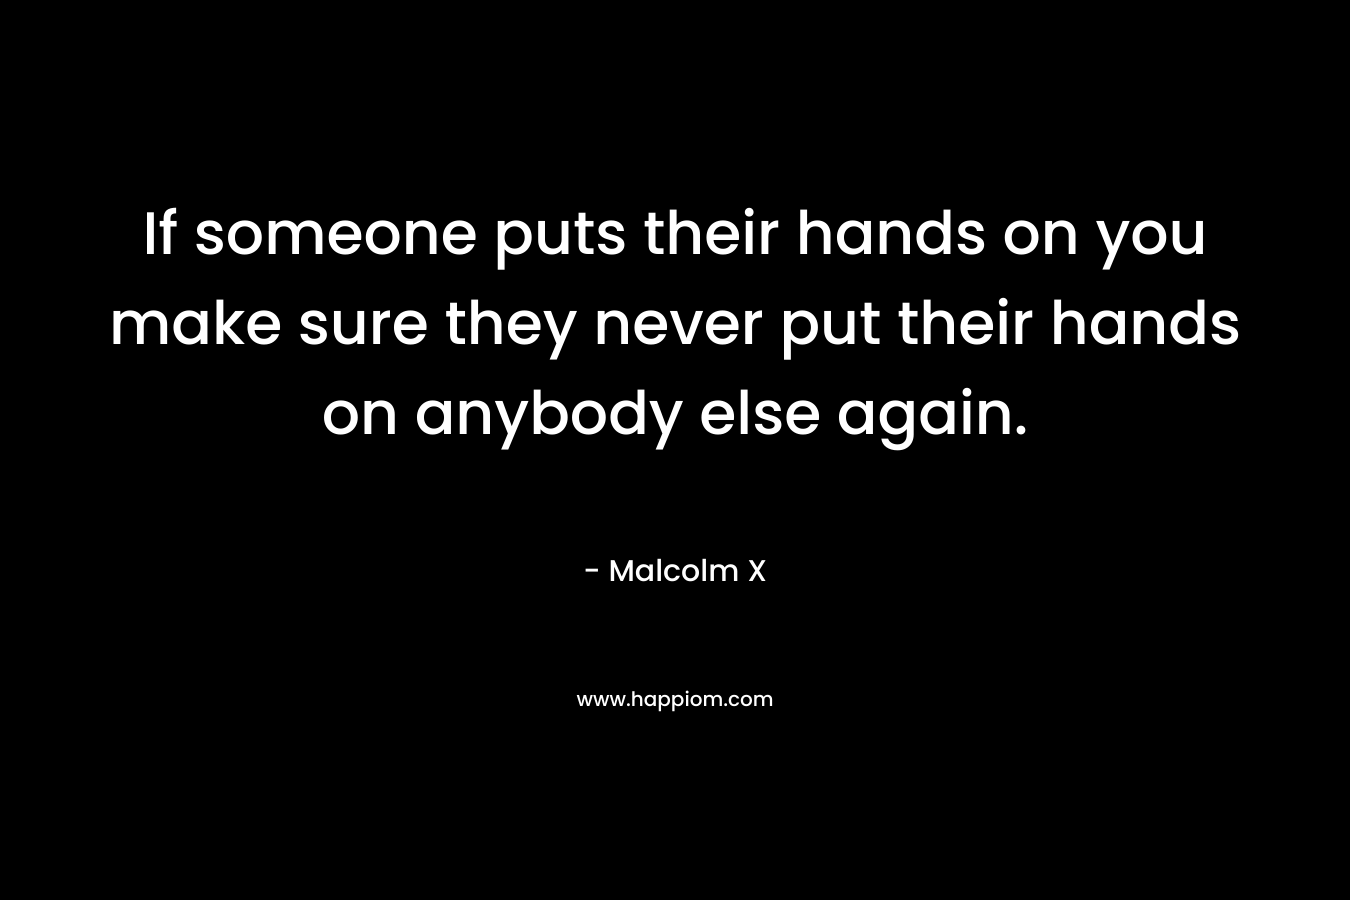 If someone puts their hands on you make sure they never put their hands on anybody else again. – Malcolm X